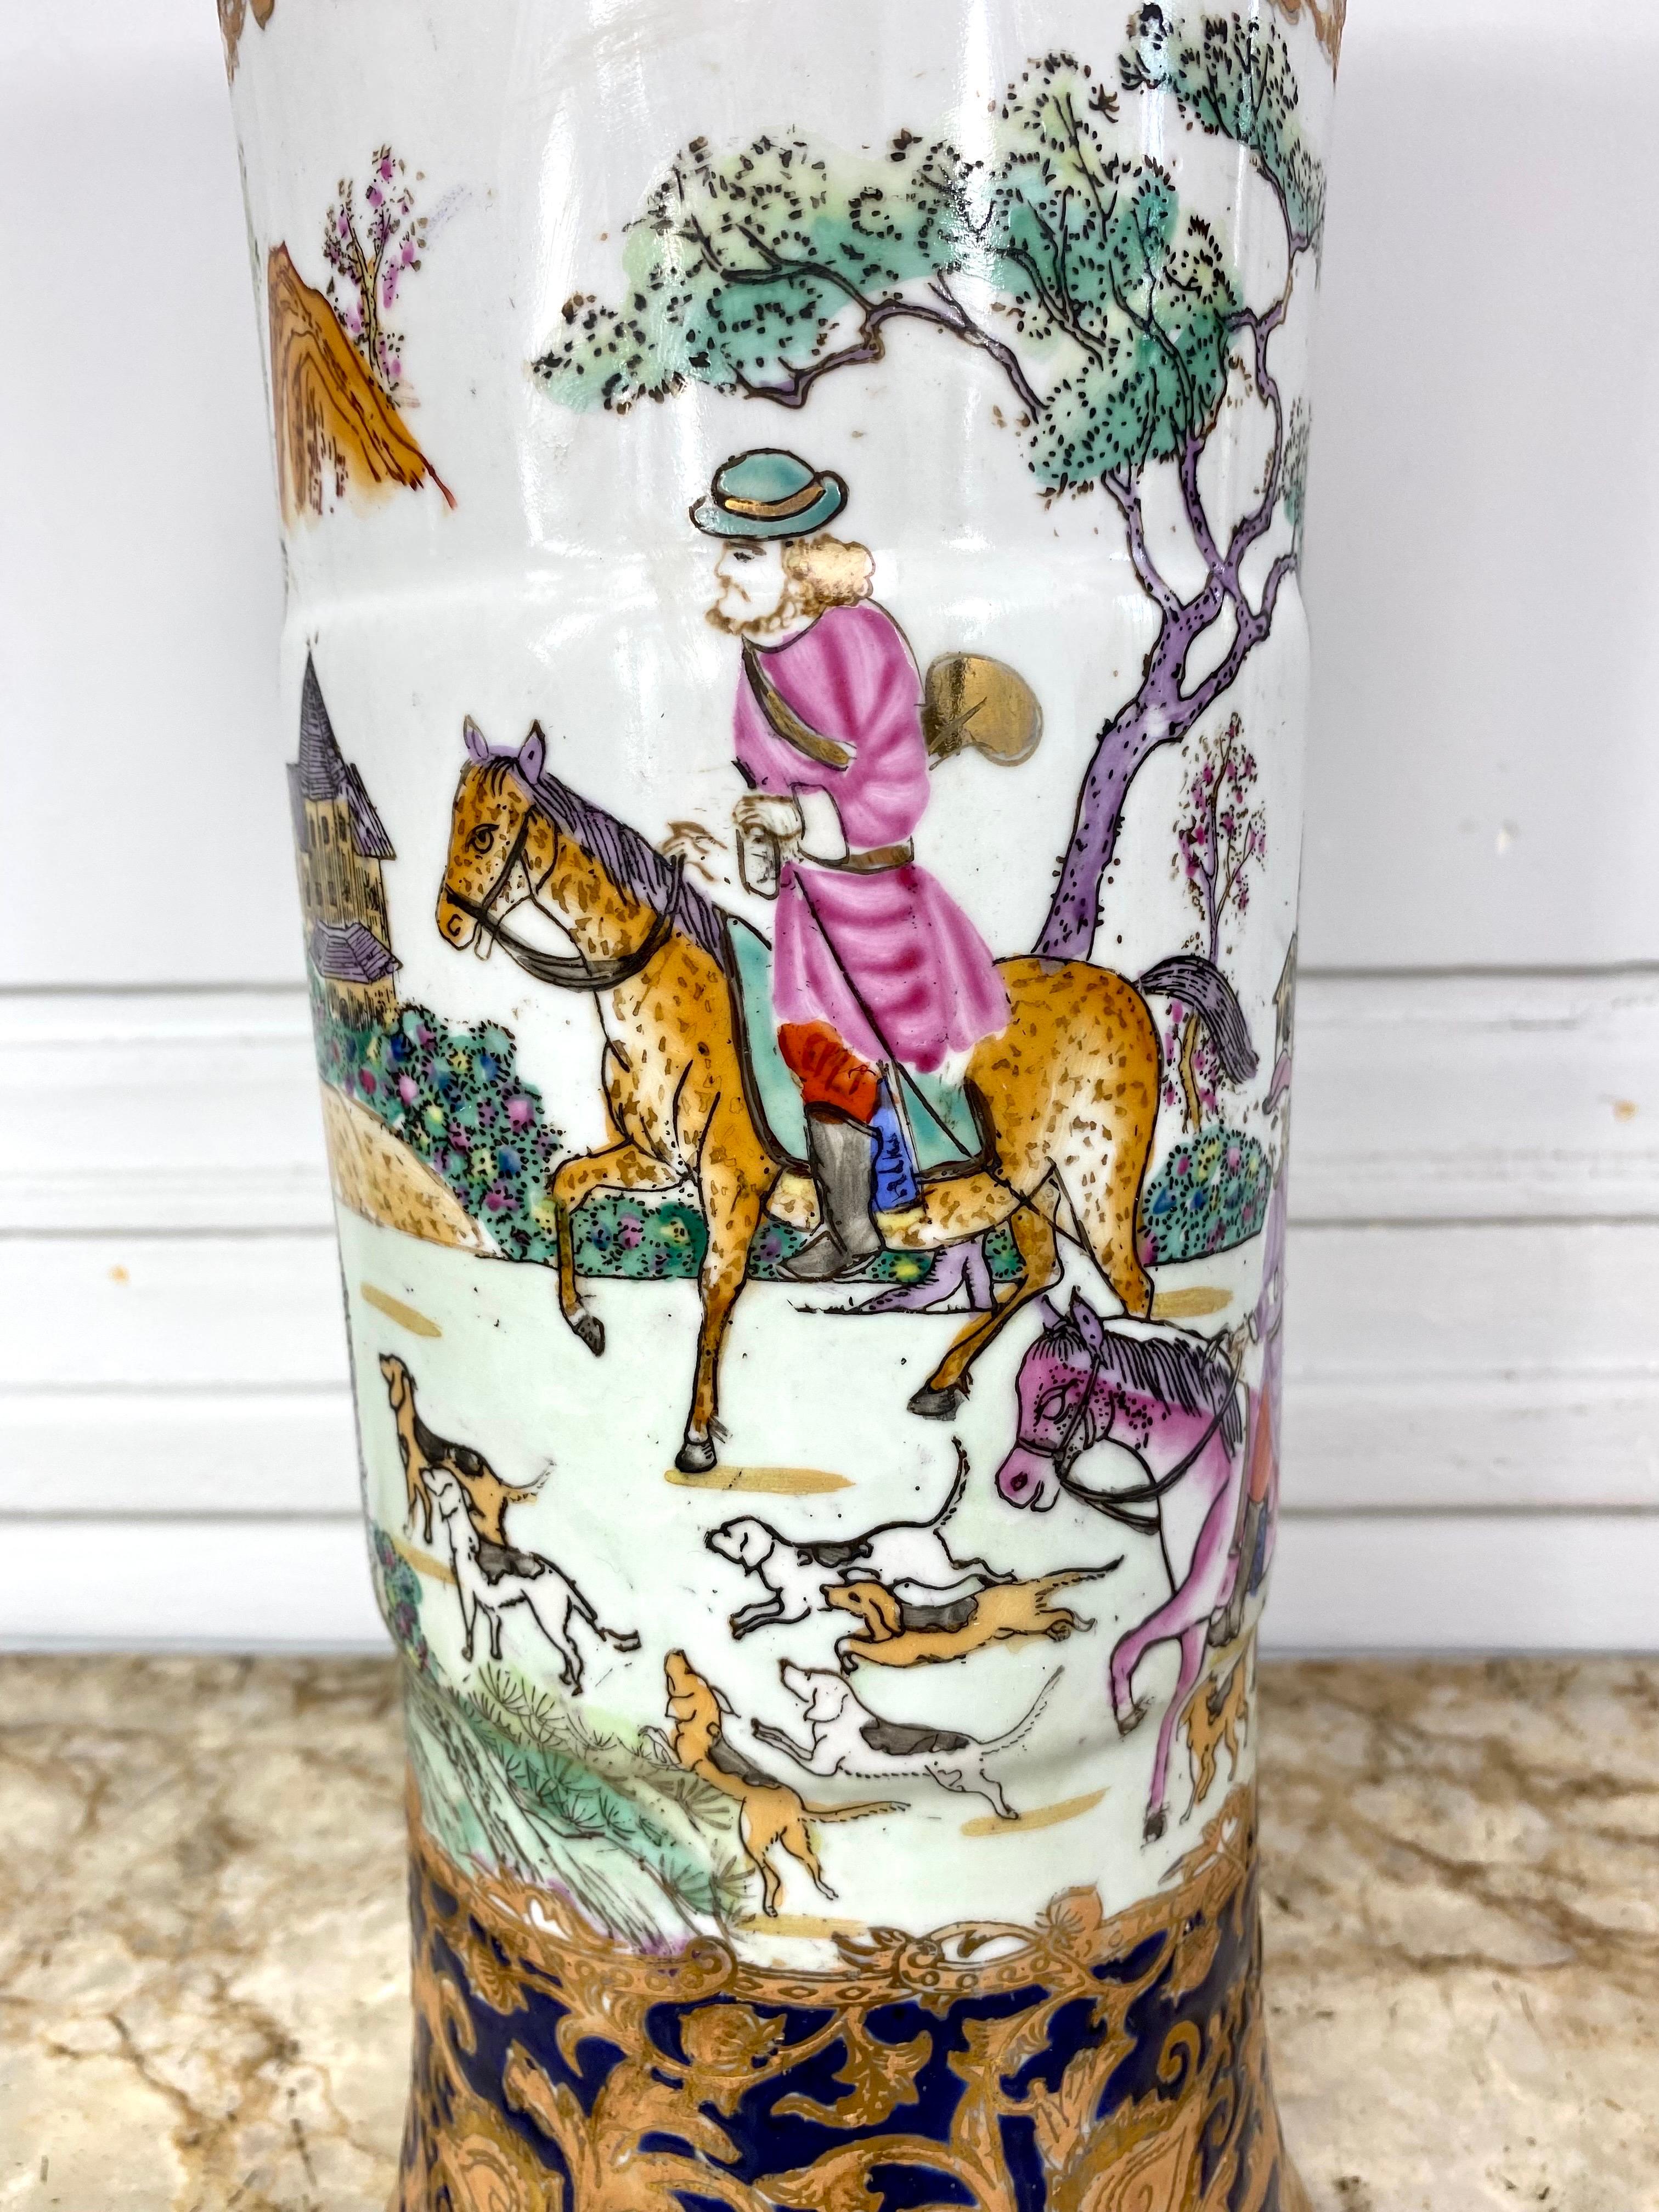 Chinese Compagnie Des Indes Porcelain Cornet Vase with Hunting Scene 19th Century, China